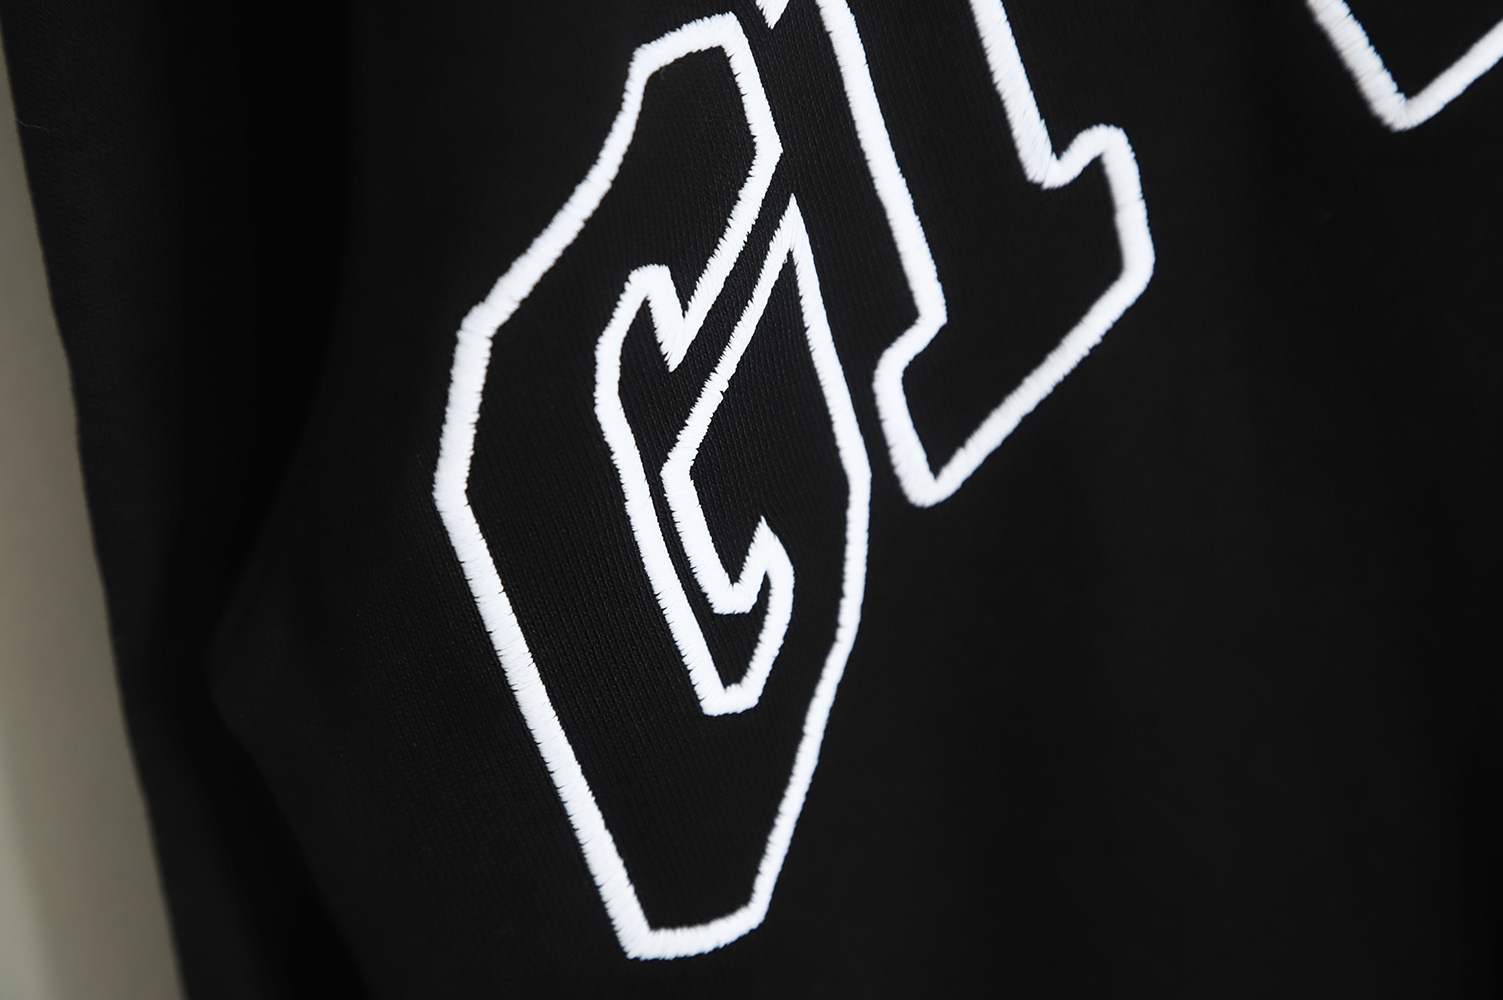 Givenchy 22SS Patch Letter Embroidered Hoodie Hoodie